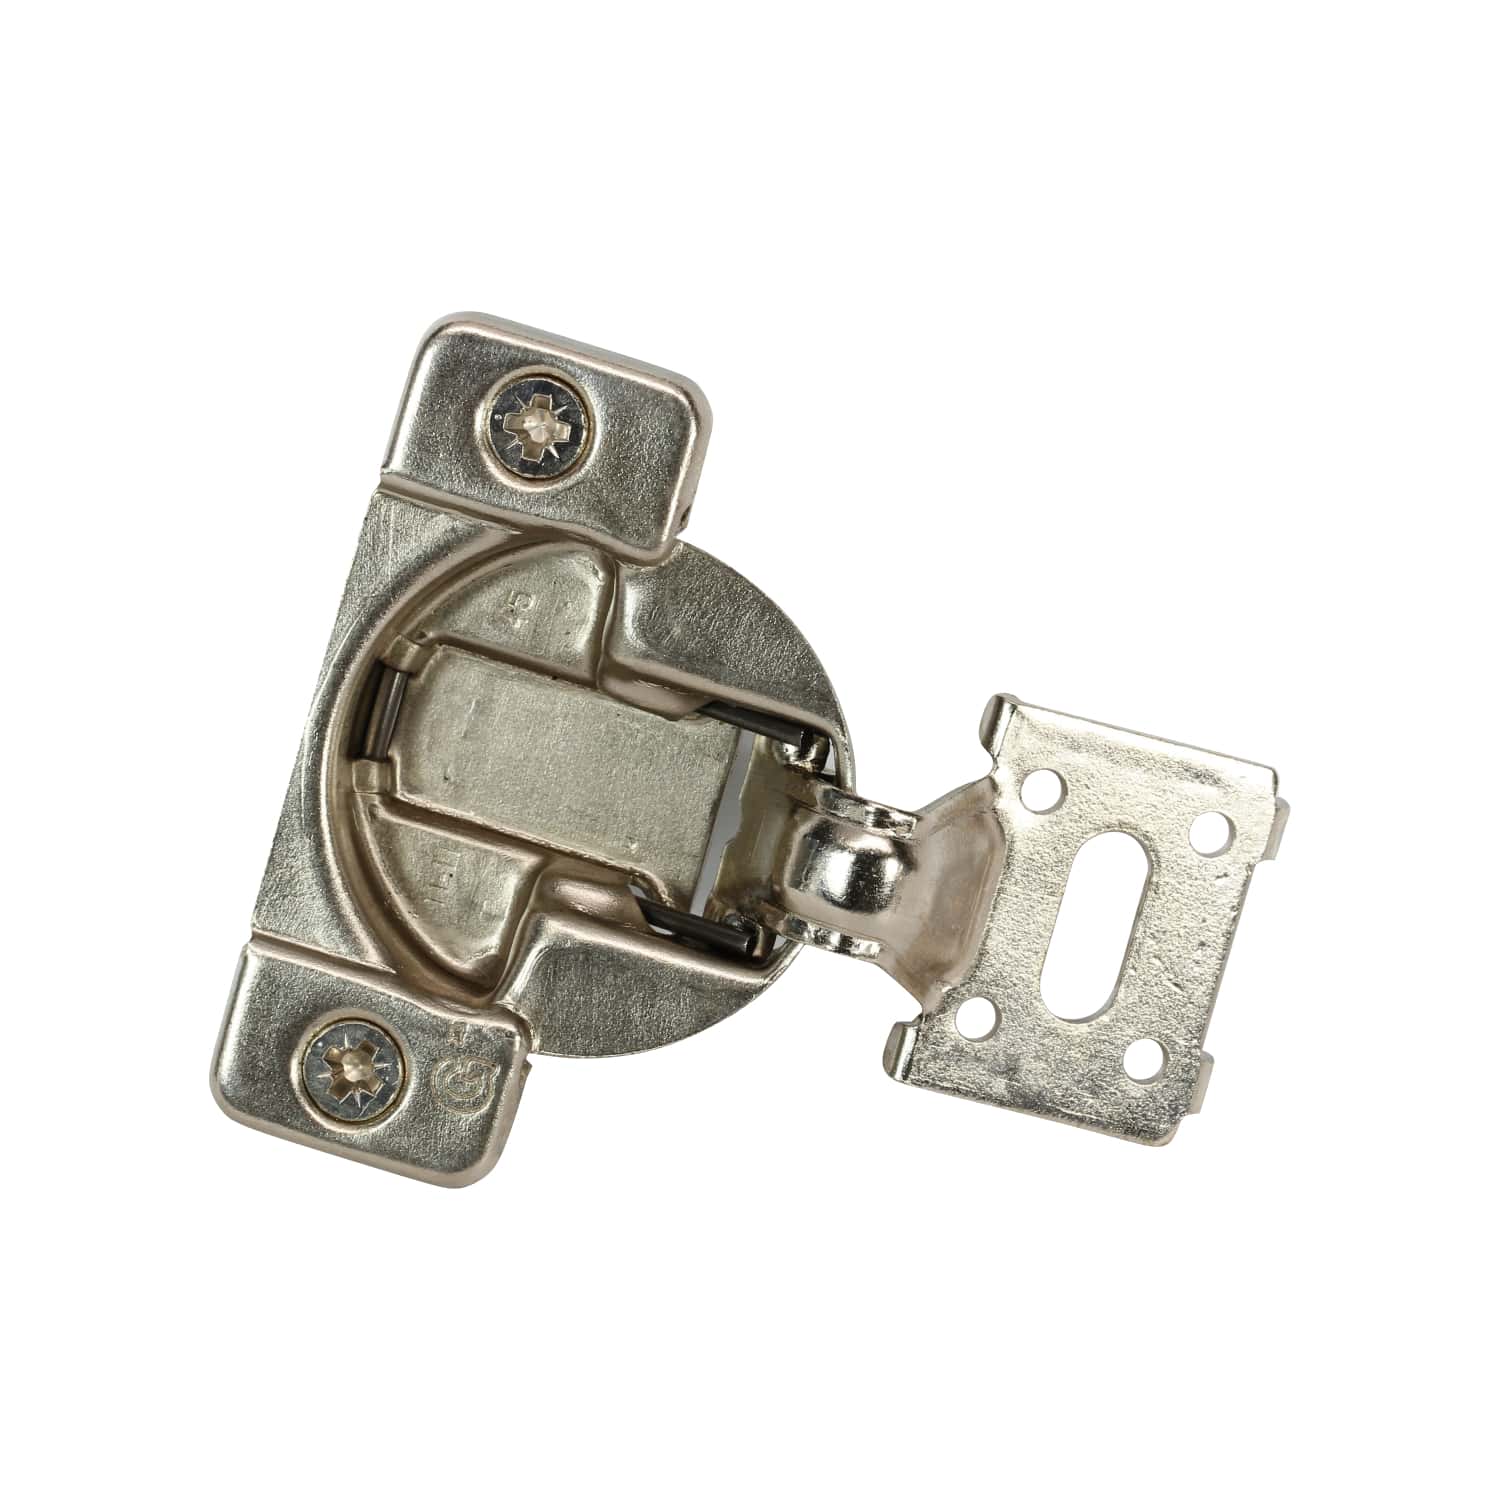 Grass Soft Close Hinge, Compact Cabinet Hinges